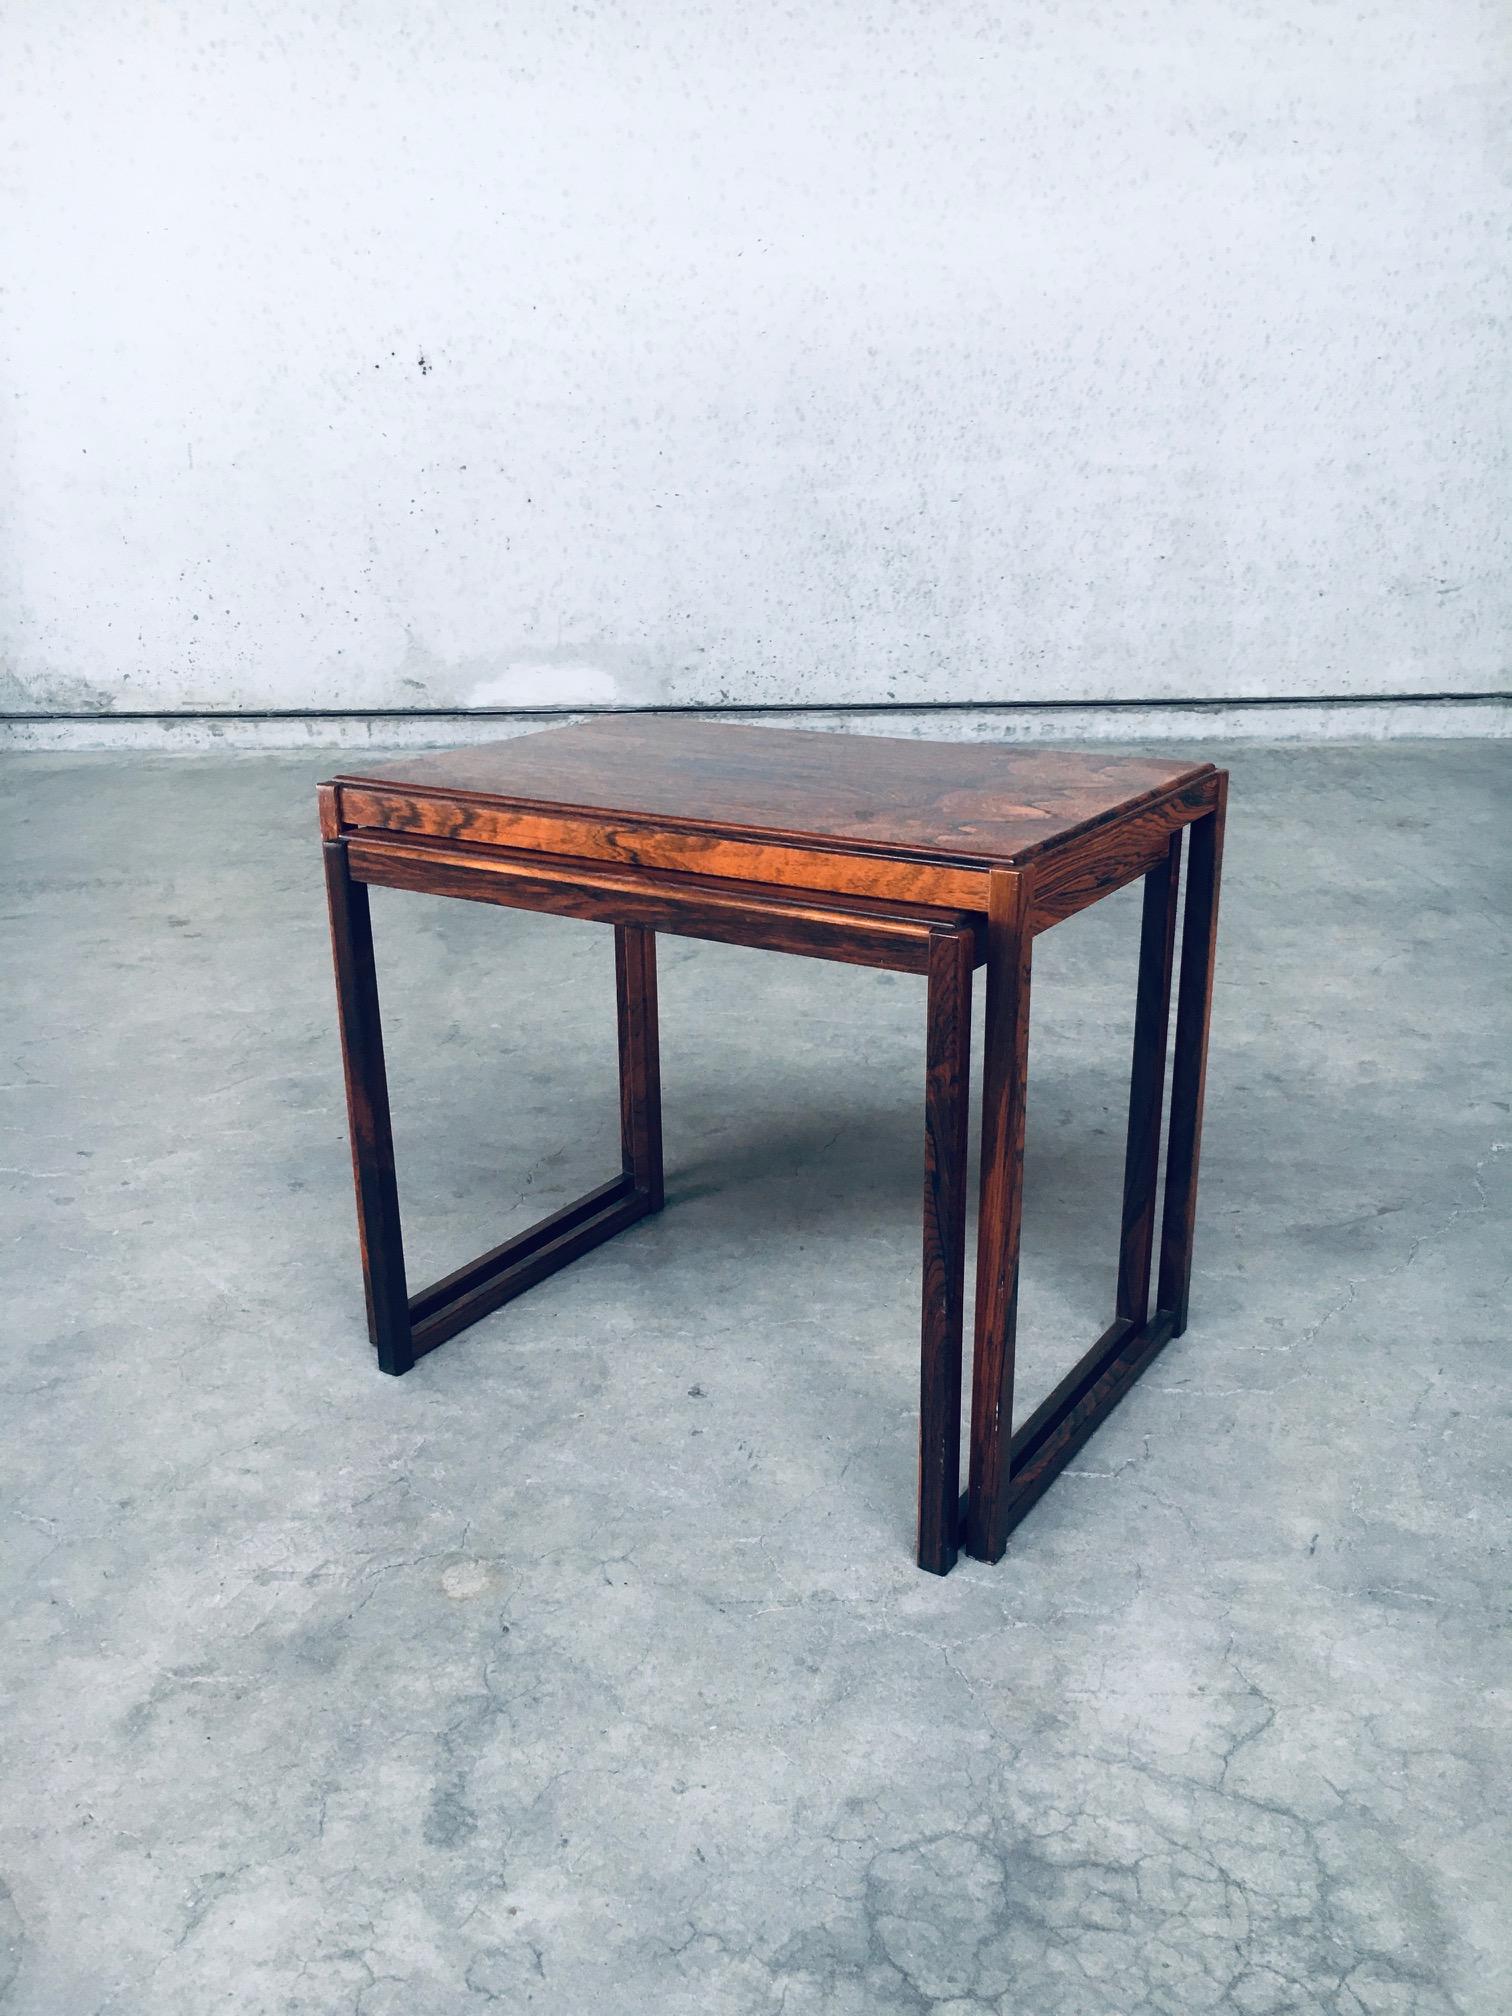 Vintage Mid-Century Modern Scandinavian Design Nesting Table set of 2. Made in Denmark, 1960s. Palisander style wood constructed side nesting table set. In very good original condition. These Measure: large: 53cm x 63cm x 42cm - medium: 49,5cm x